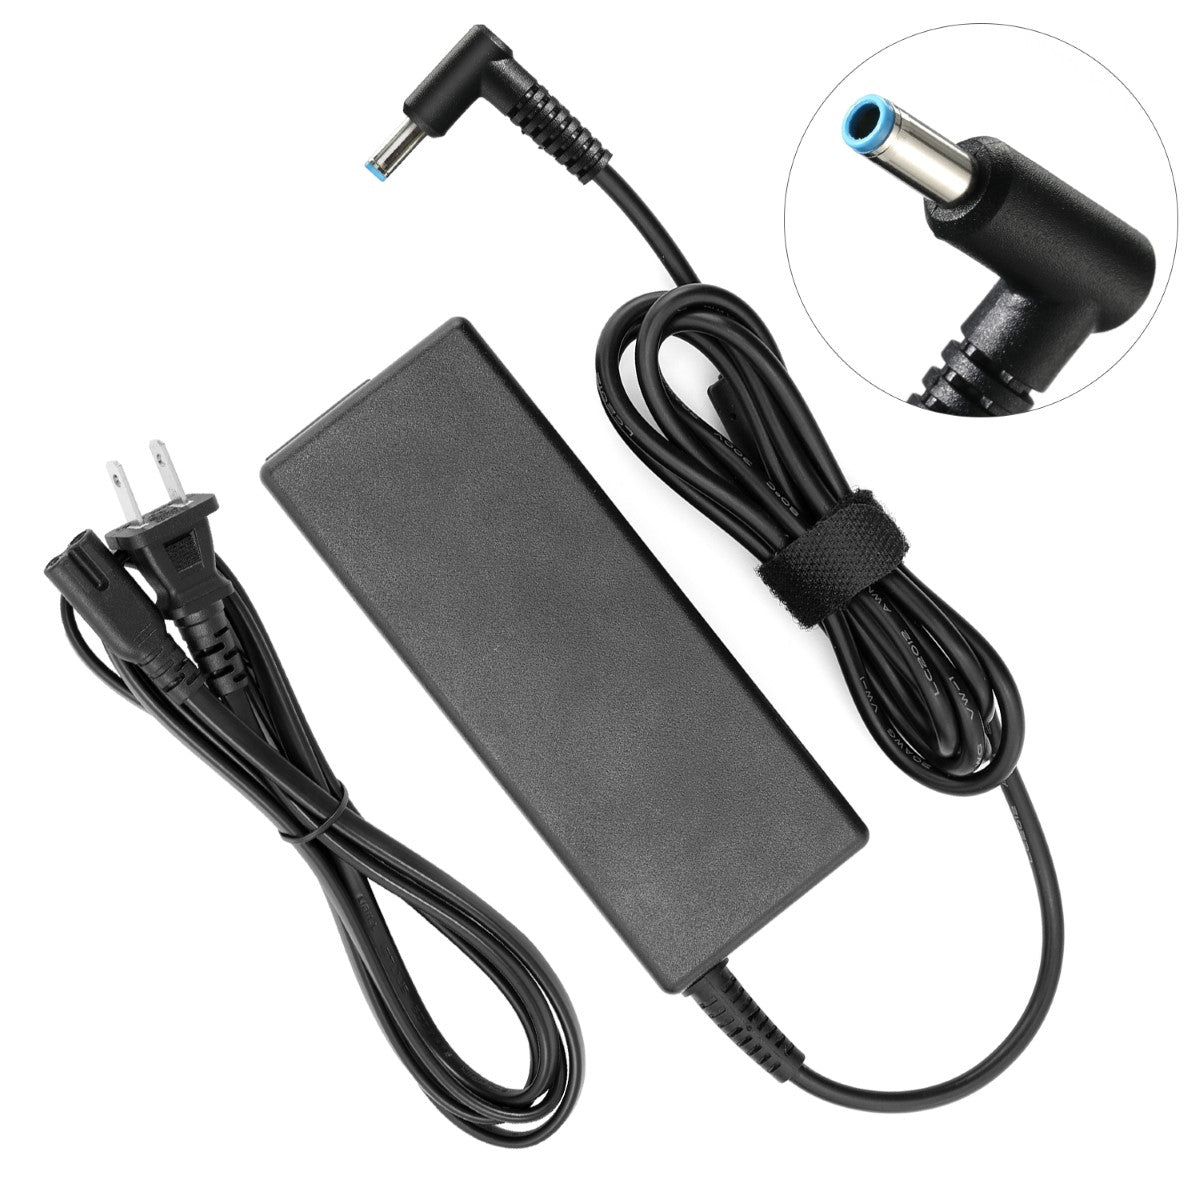 AC Adapter Charger for HP Spectre 13-4003dx Notebook.